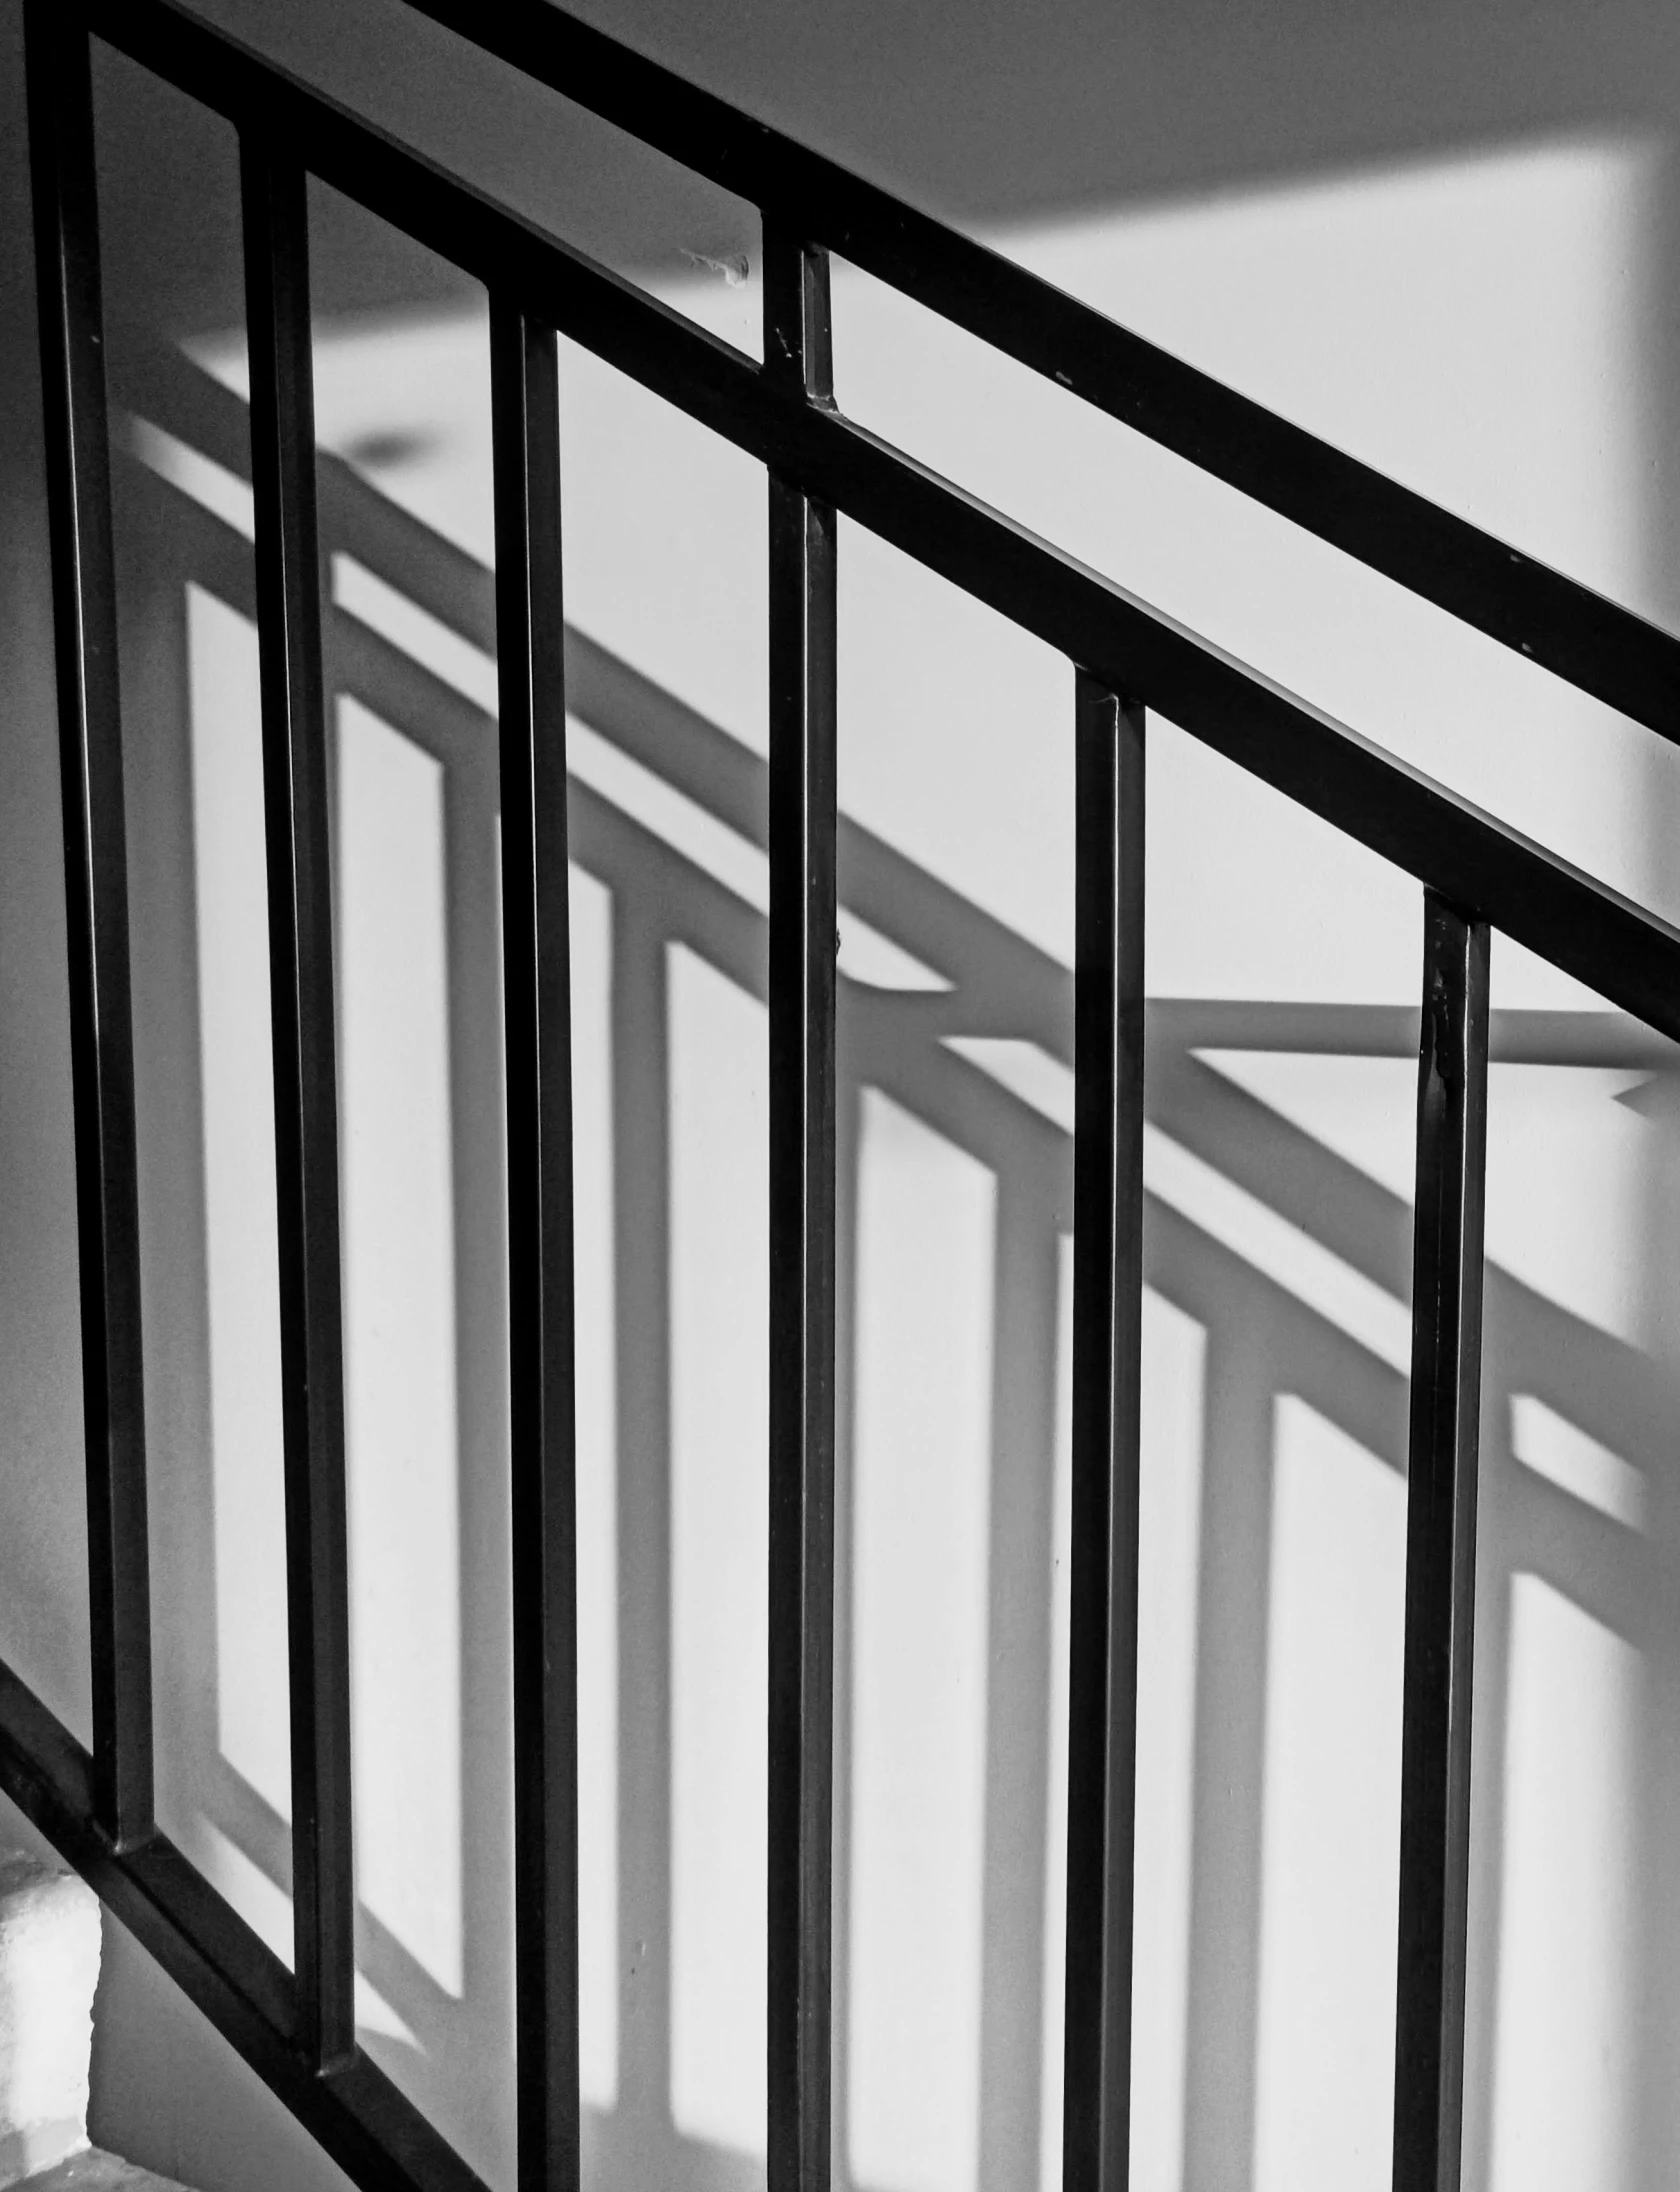 a picture of an unkempt railing with bars